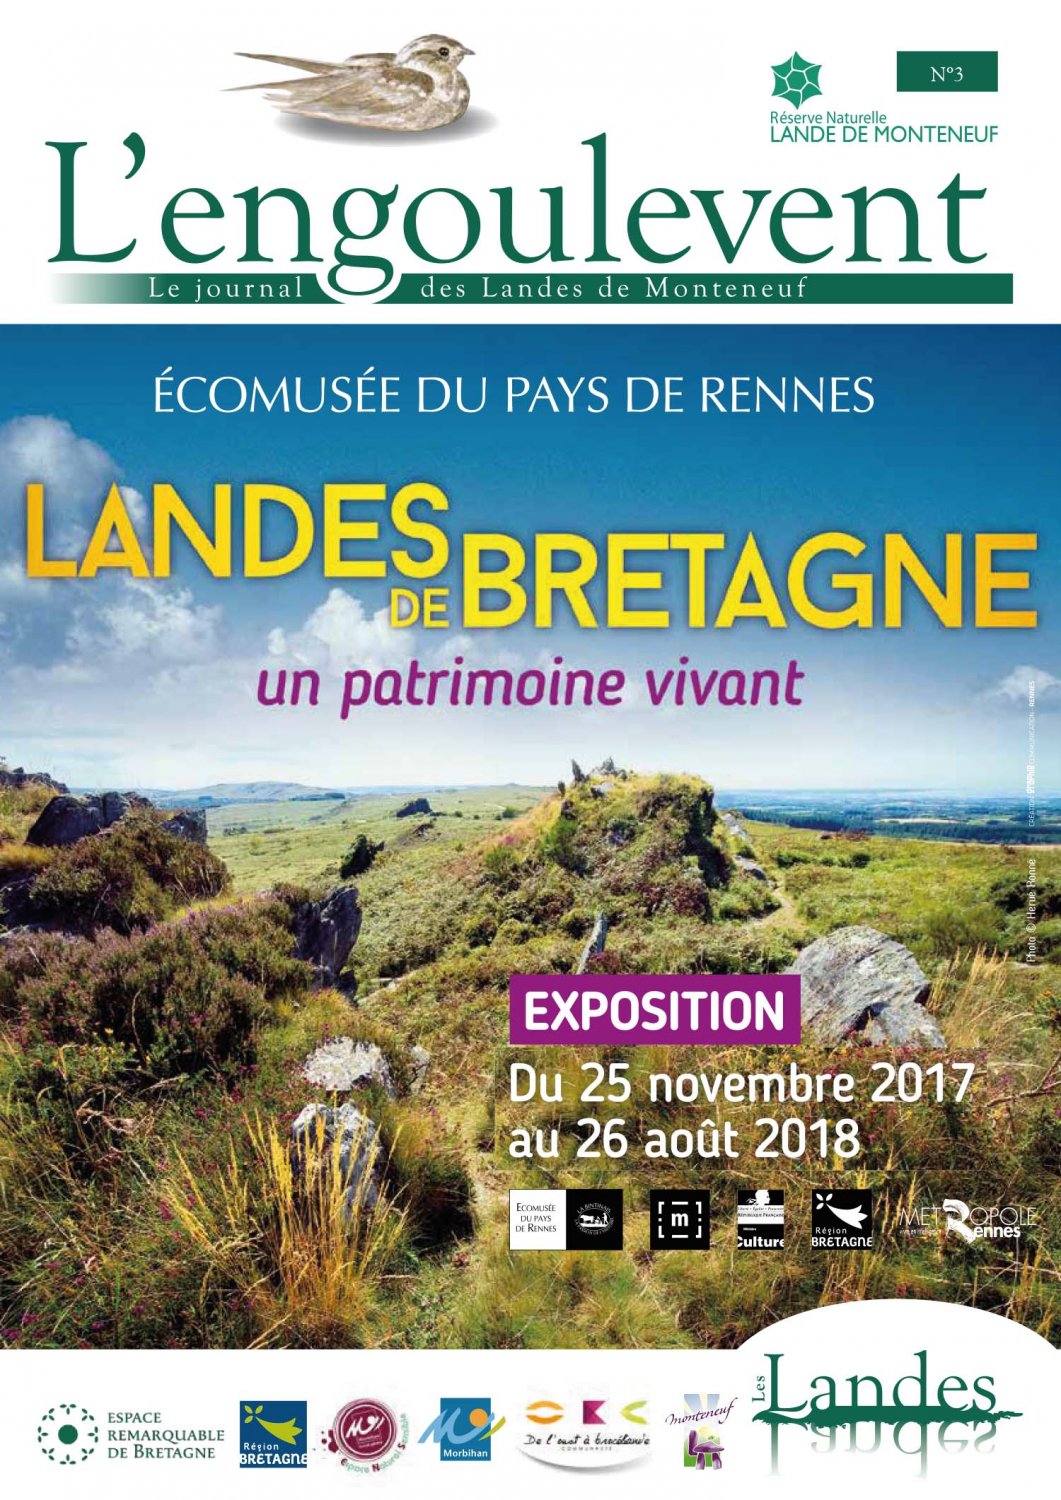 L'engoulevent N°3